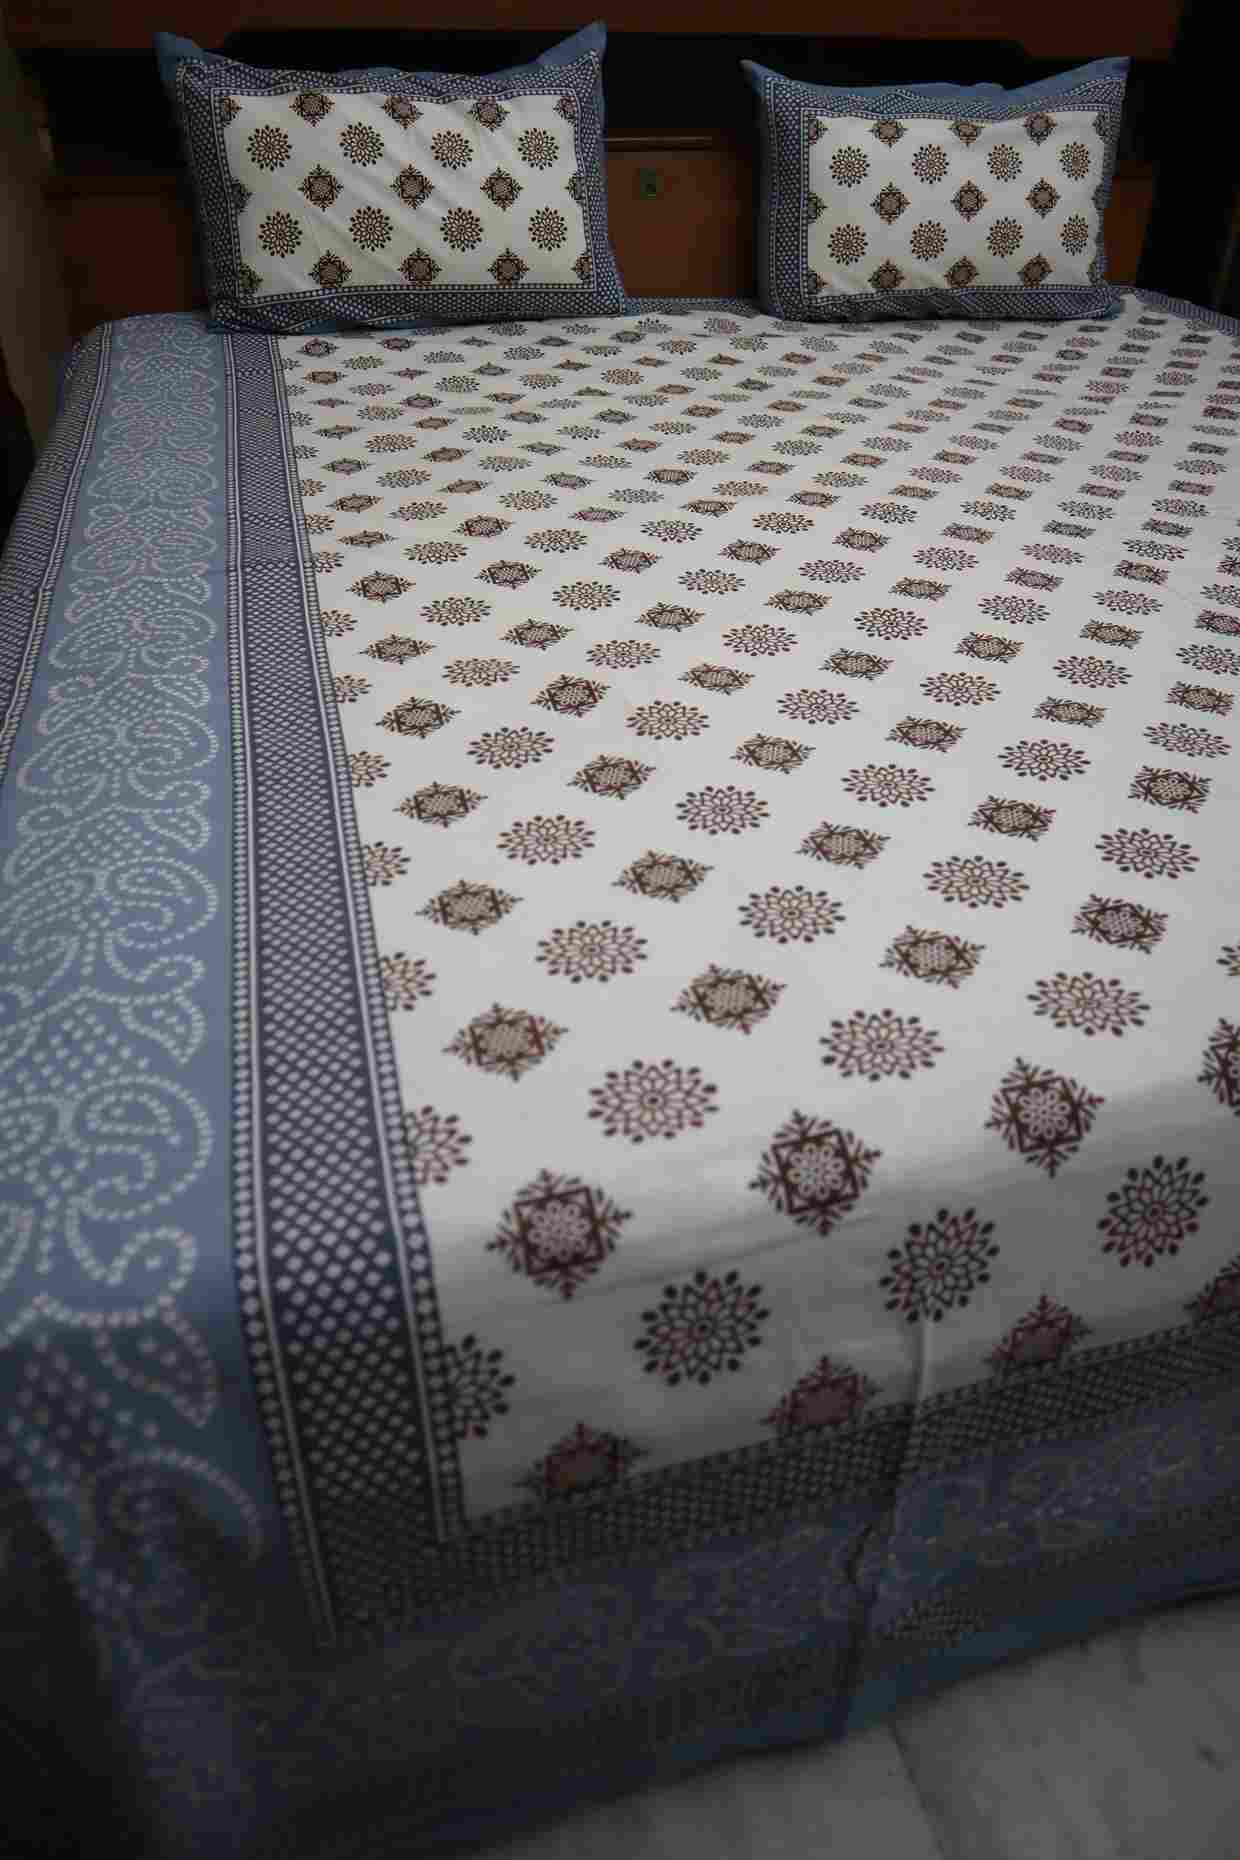 White Butta Pure Cotton Jaipuri Bedsheets for Double Bed with Pillow Covers, 90" x 108" King Size, 180 TC, Breathable and Skin Friendly